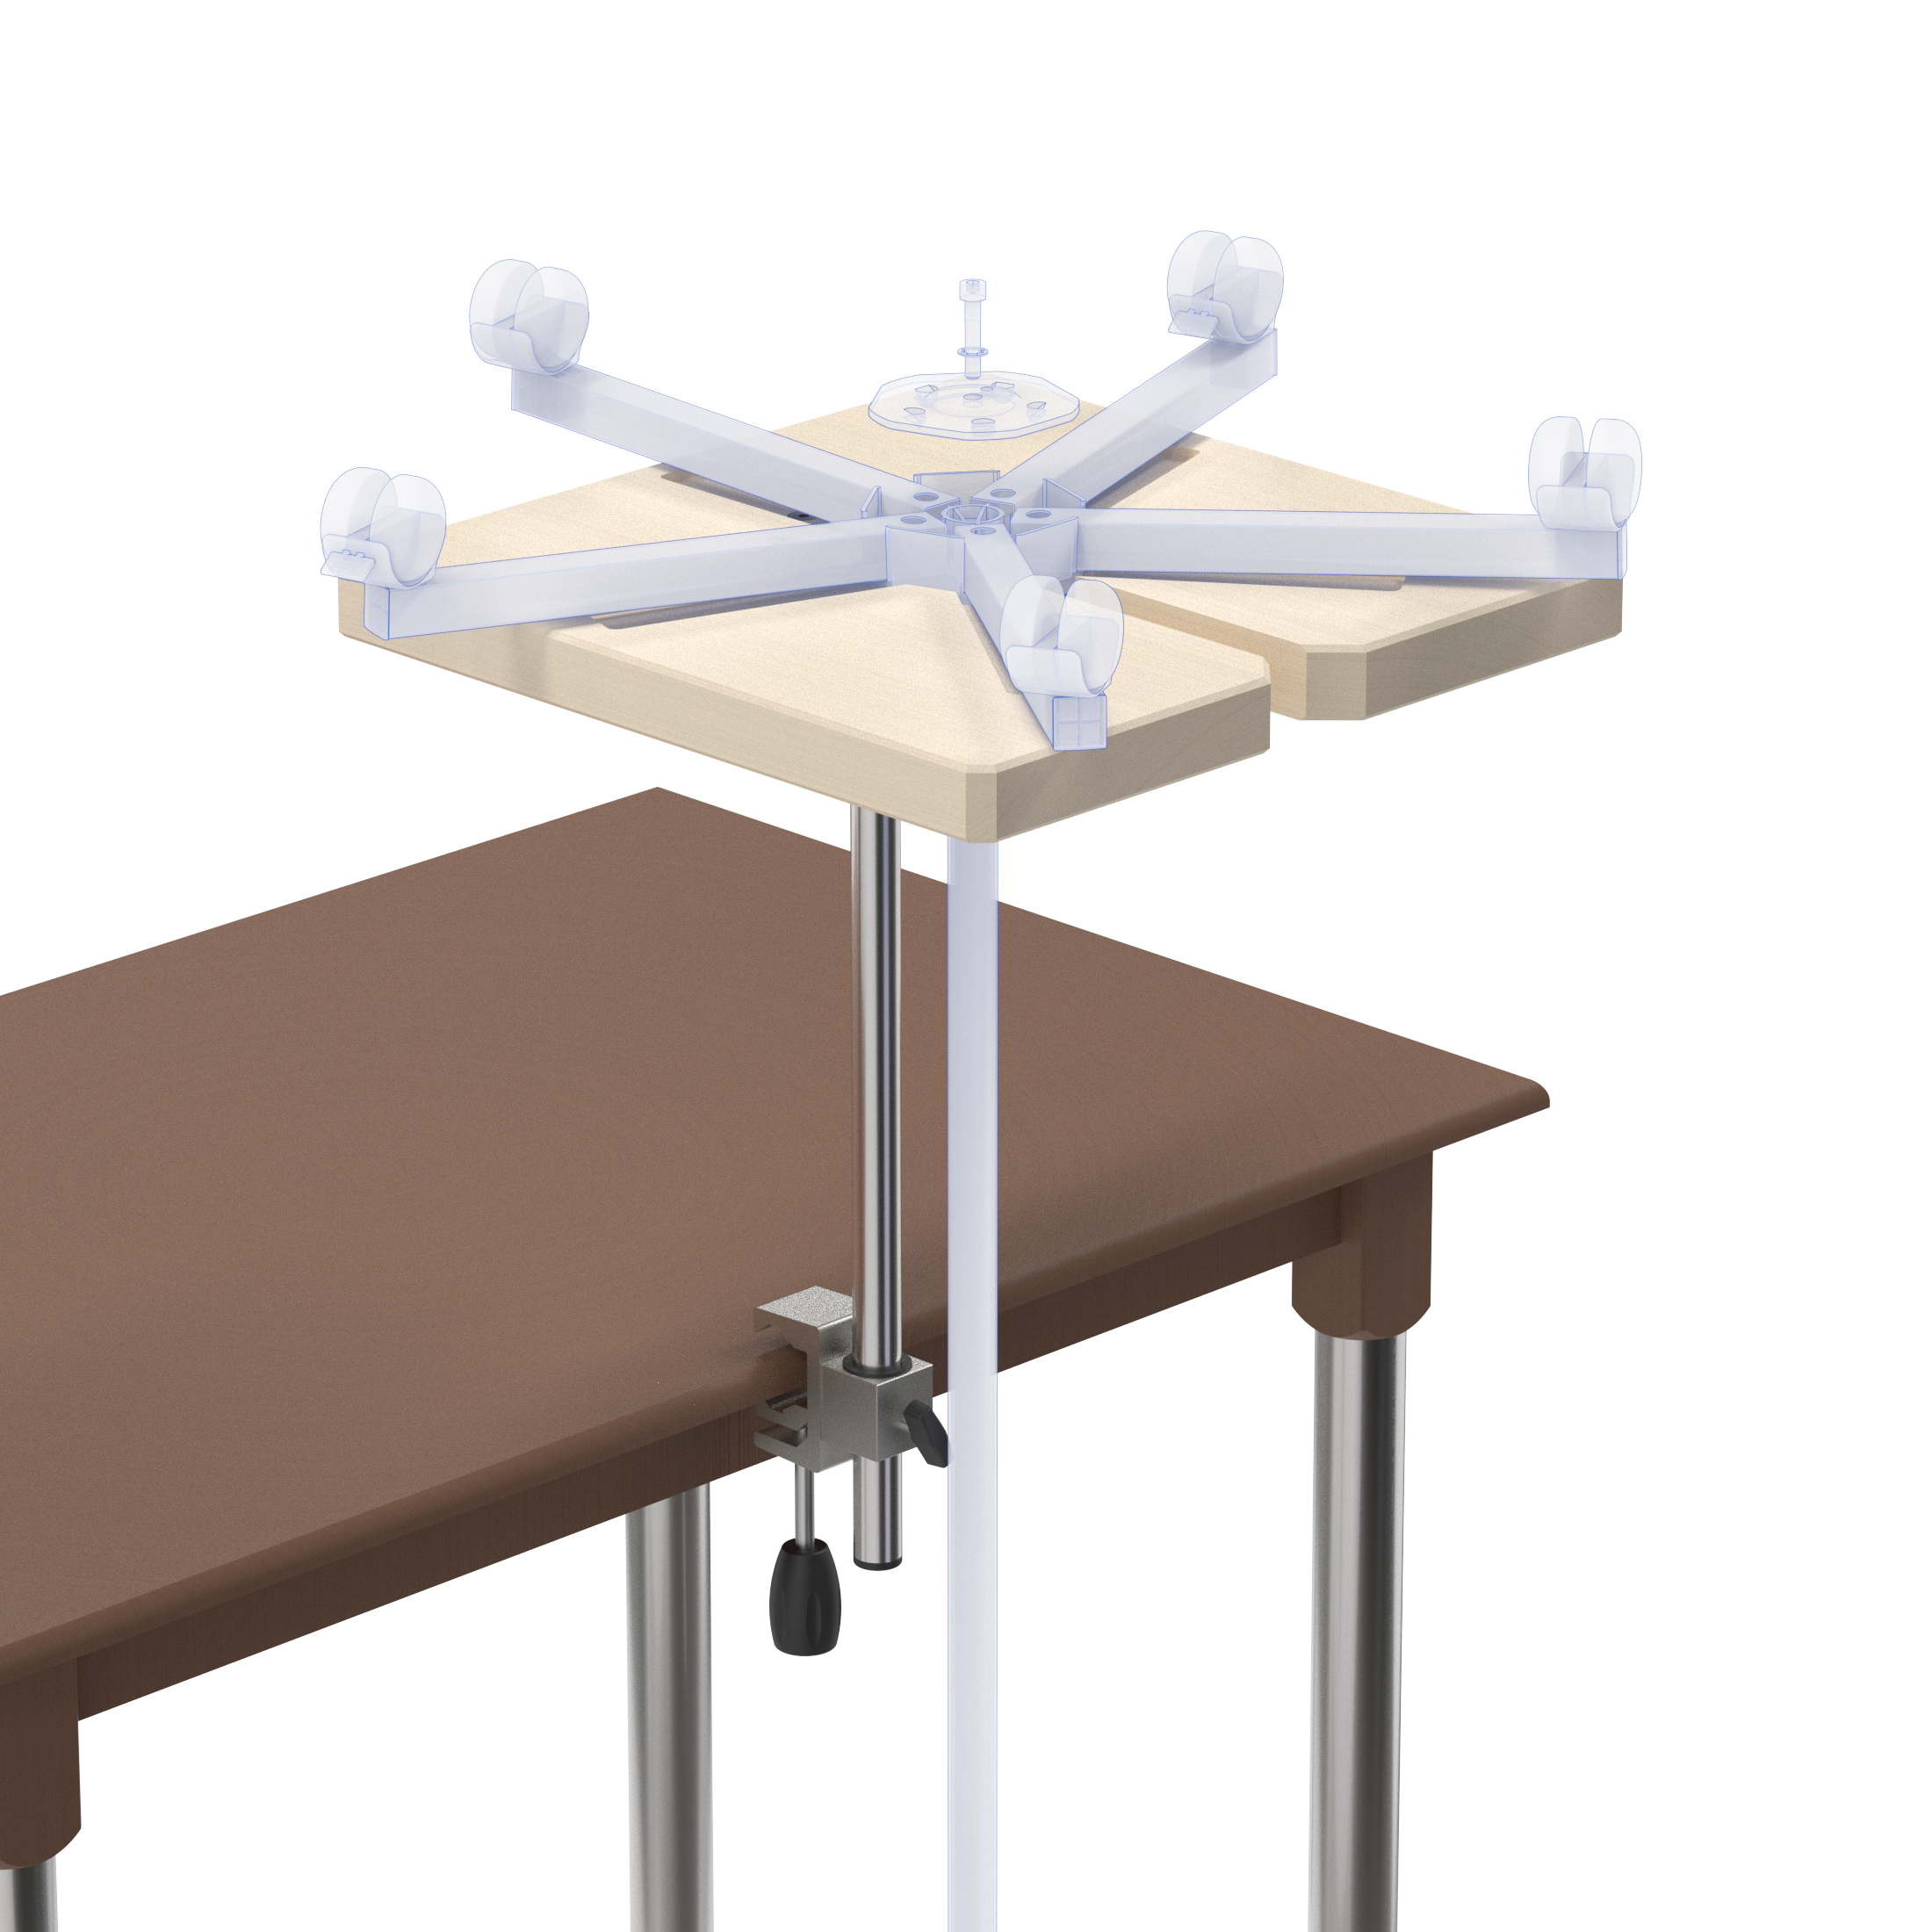 Height-adjustable mounting device